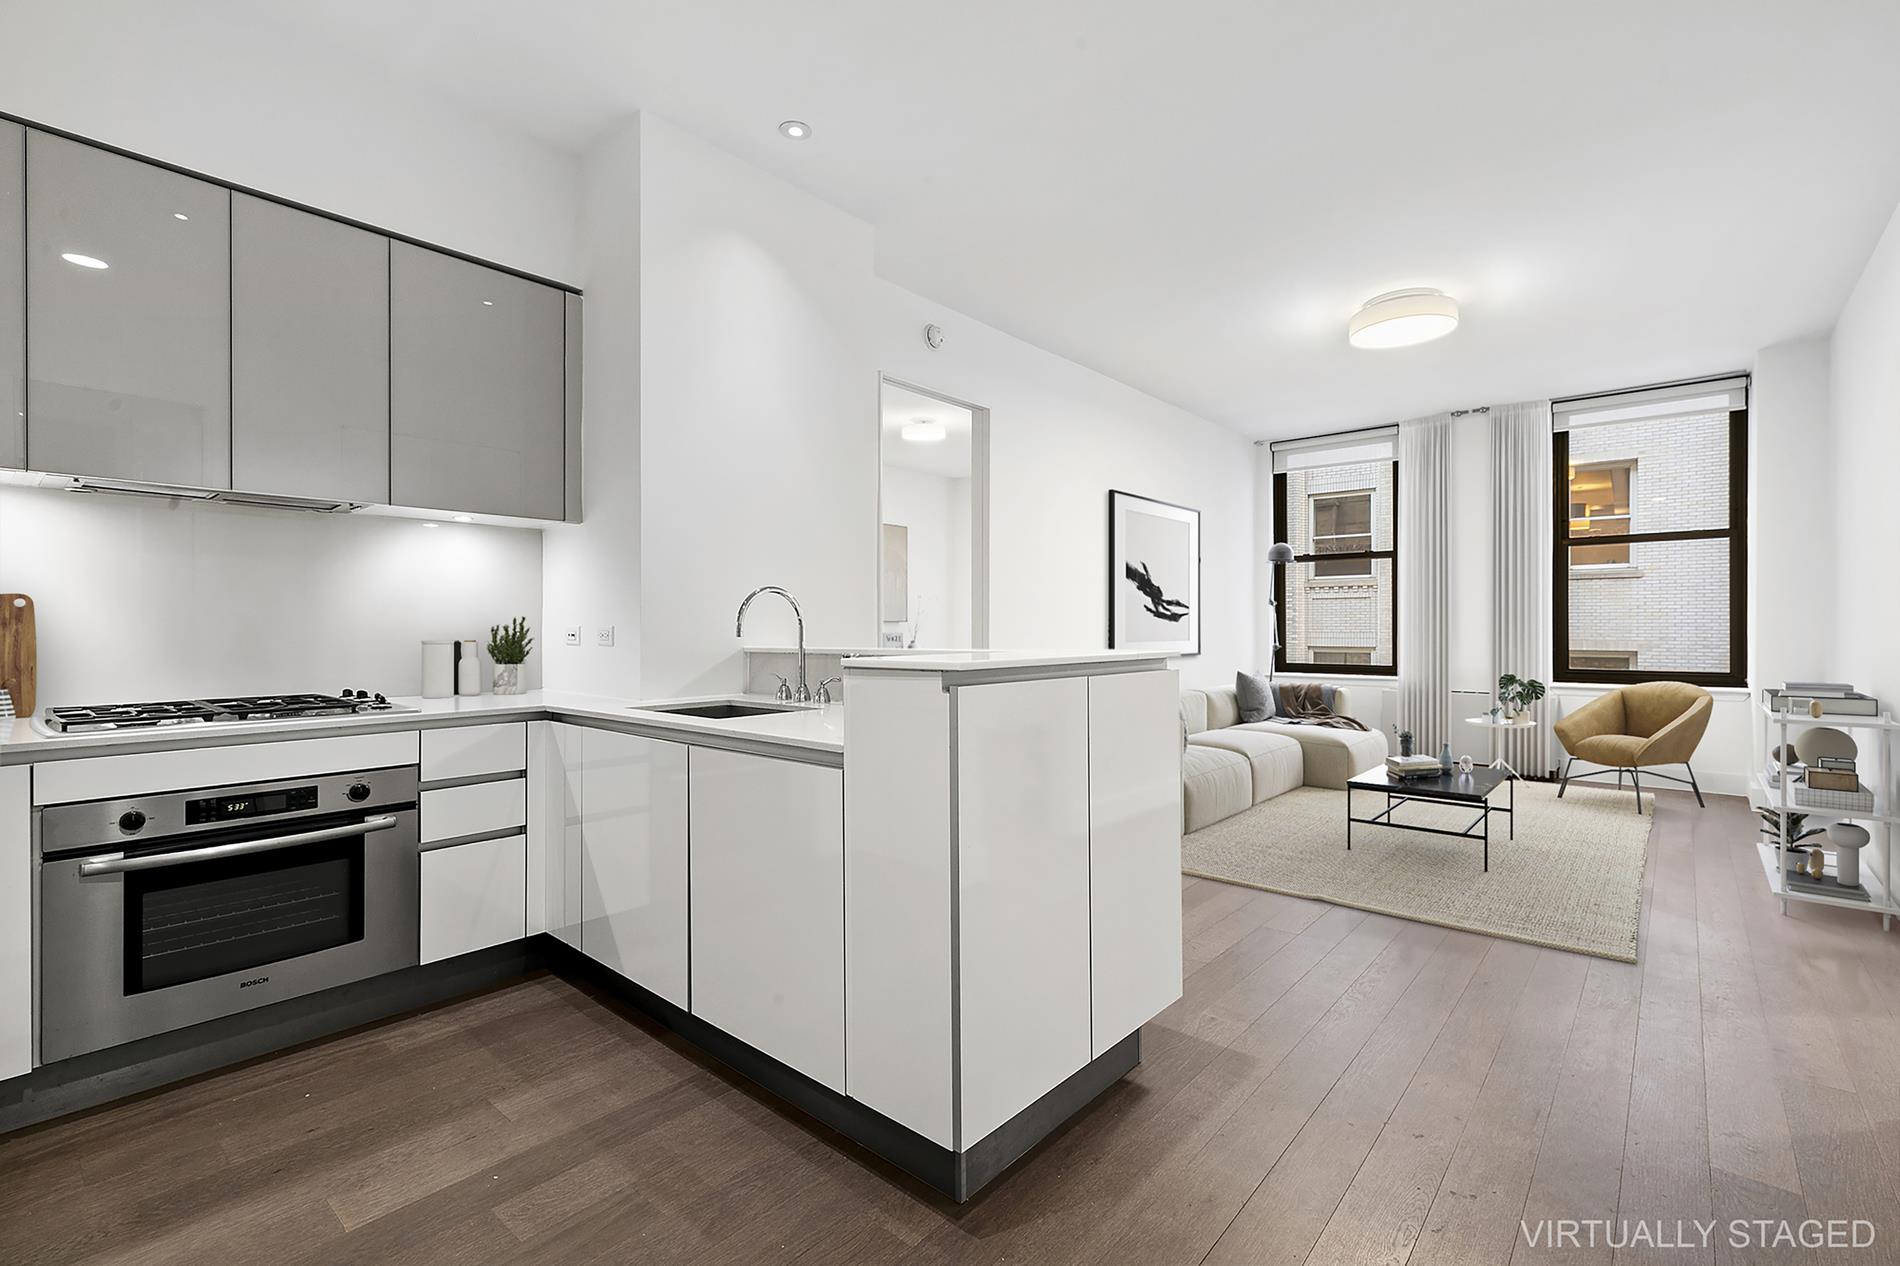 25 Broad Street 17-M, Financial District, Downtown, NYC - 2 Bedrooms  
2 Bathrooms  
4 Rooms - 